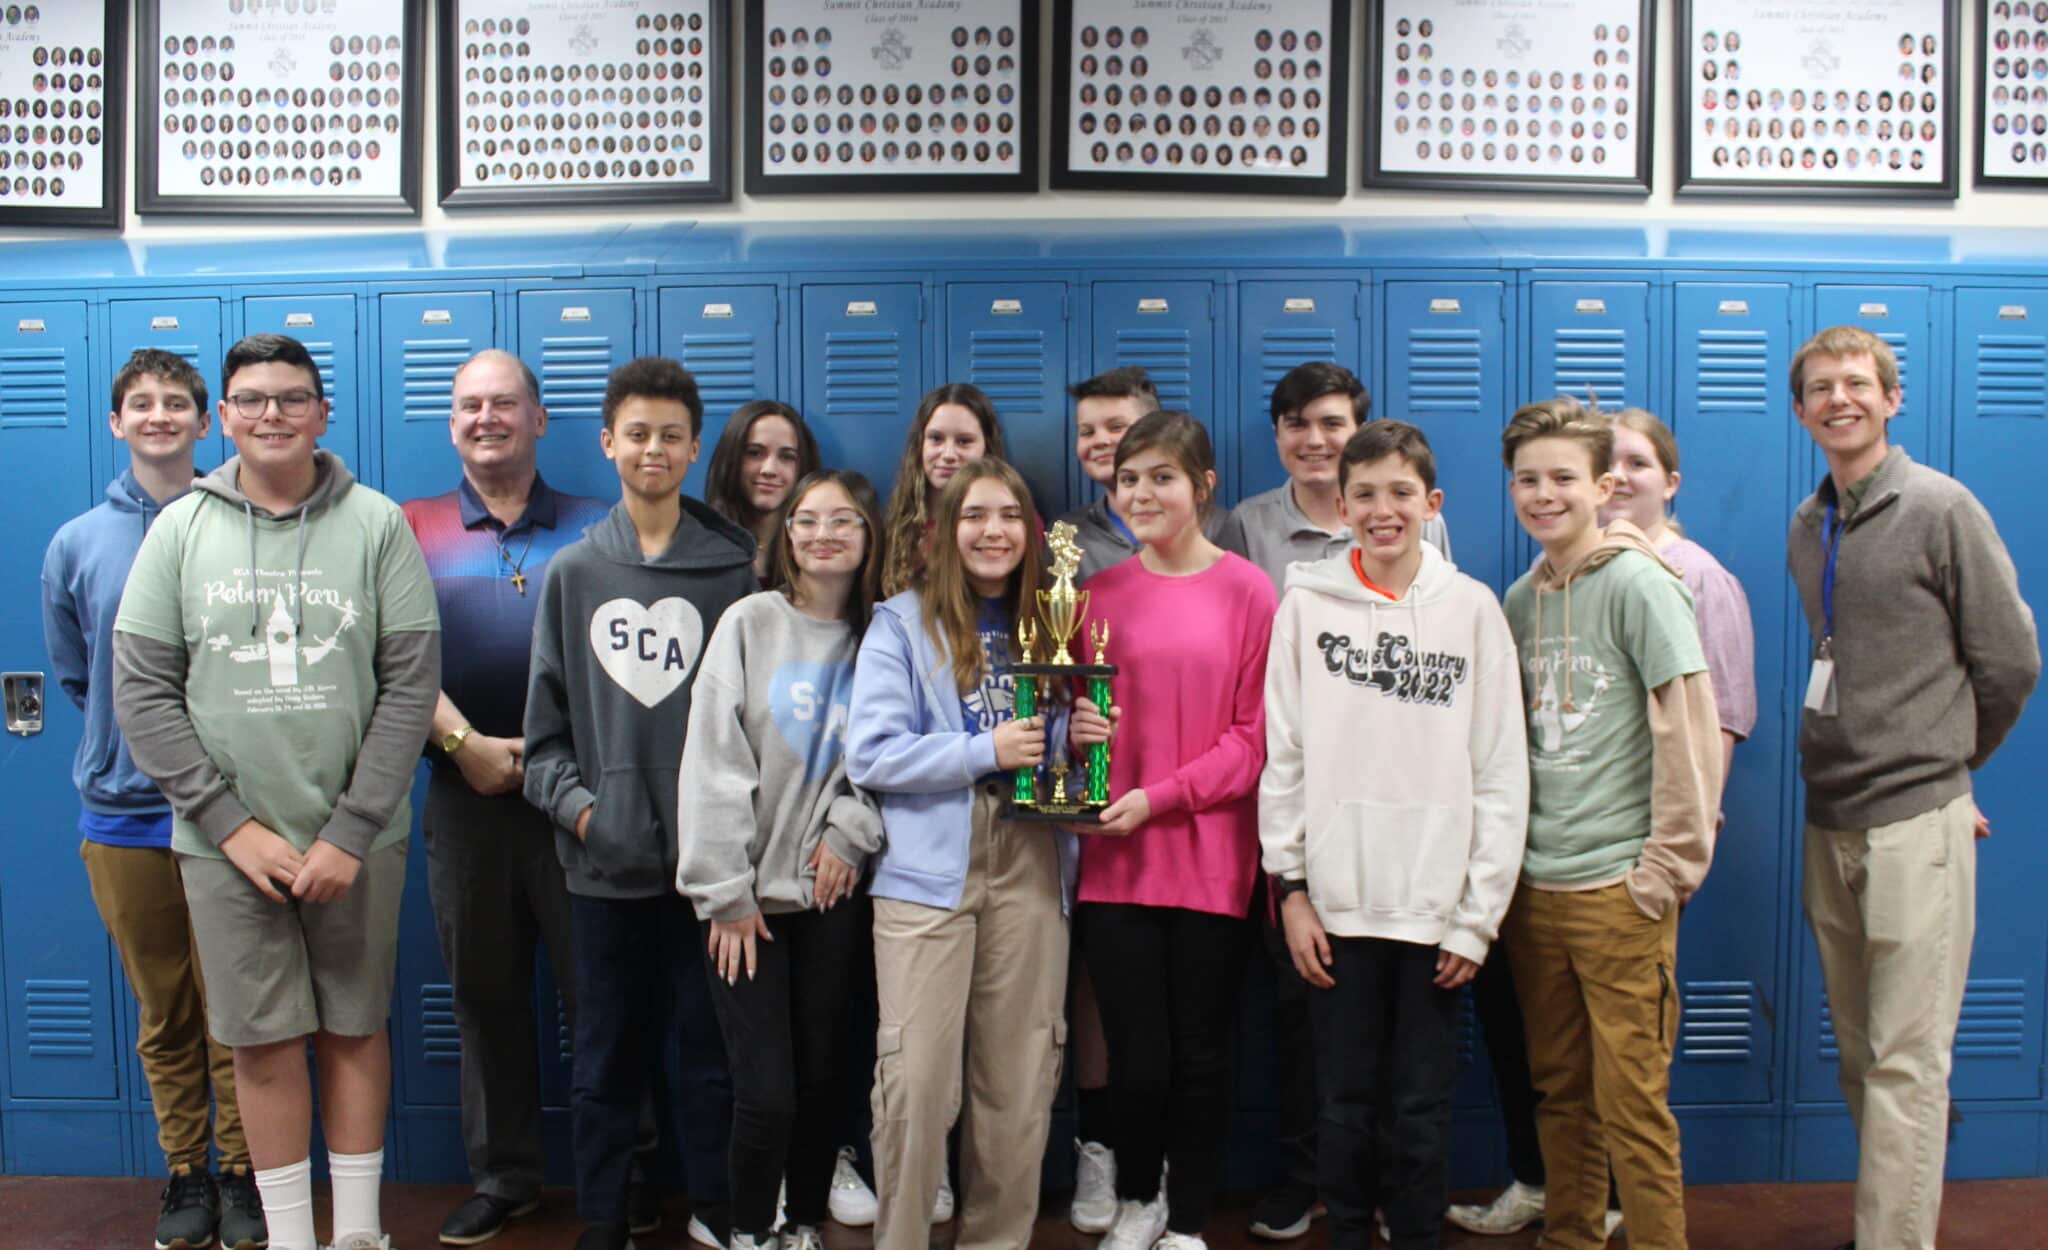 The SCA Junior High Speech & Debate team, pictured with High School Speech & Debate Coach Bill Lindsey and Junior High Speech & Debate Coach Patrick Love, has earned the right to compete at the National Speech and Debate Association Middle School tournament in Phoenix, Arizona. Pictured here, the team took 1st place at the Ray-Pec South Middle School tournament.